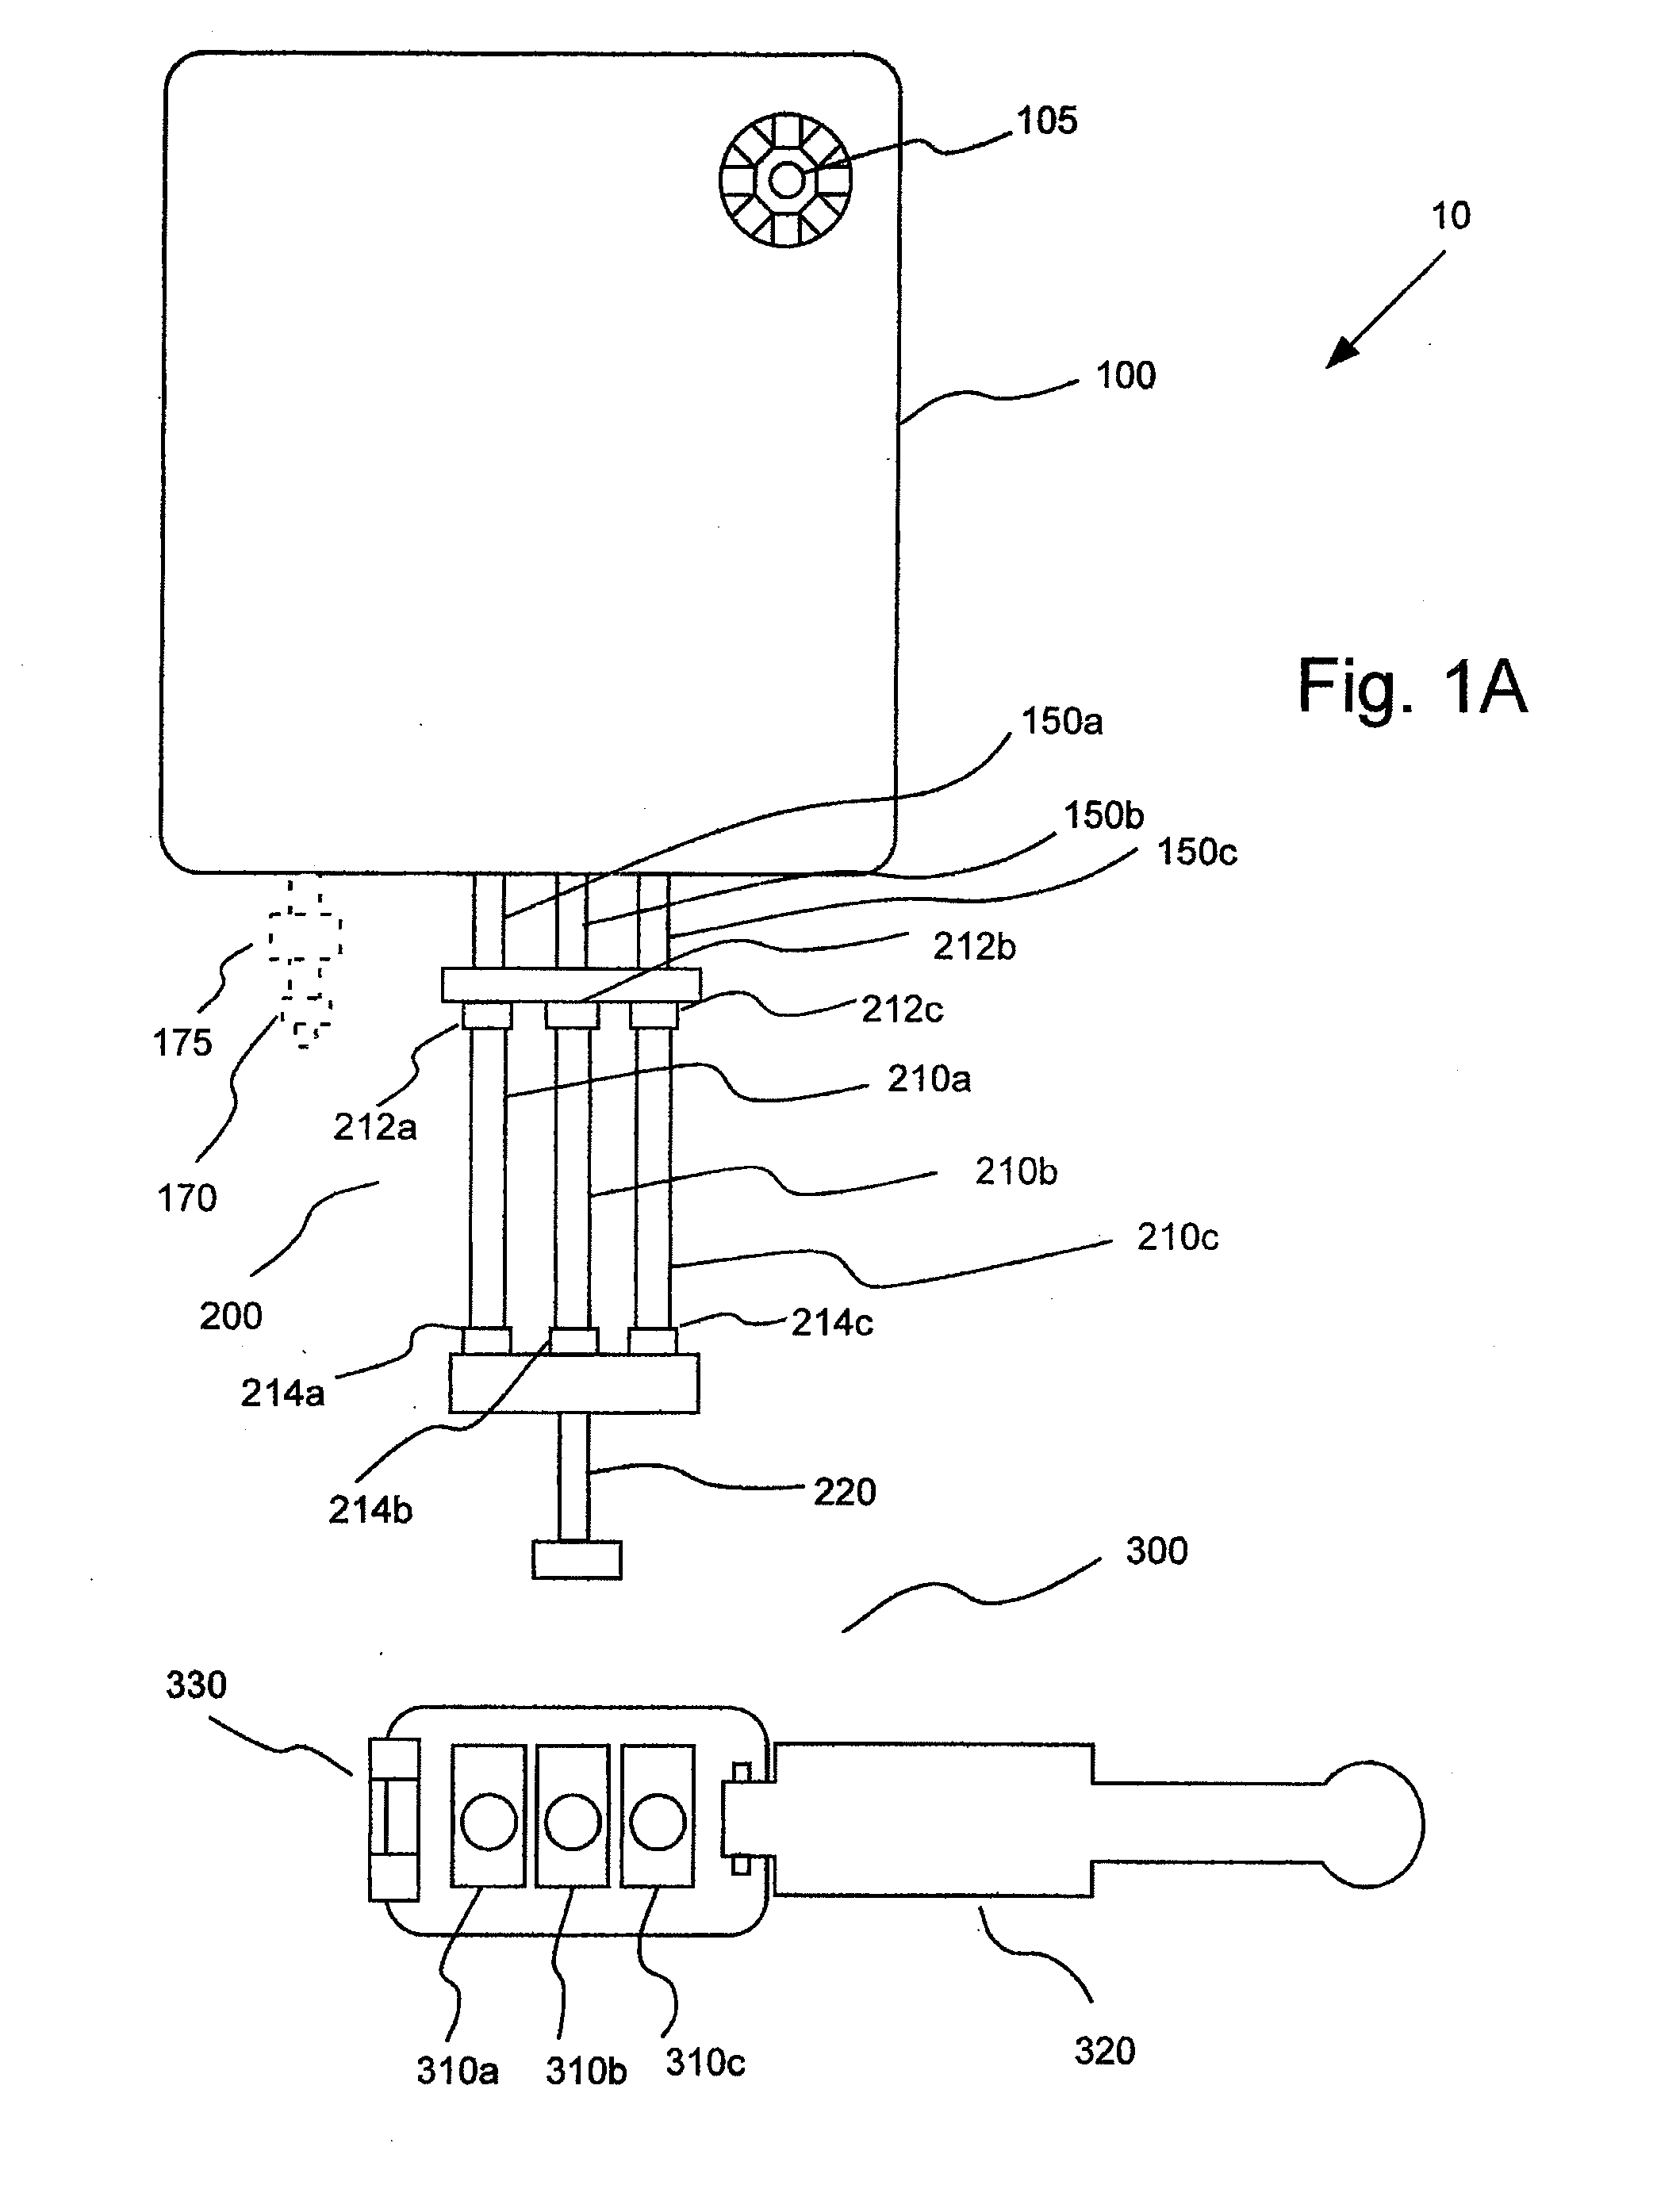 Fluid delivery system having a plurality of resilient pressurizing chambers